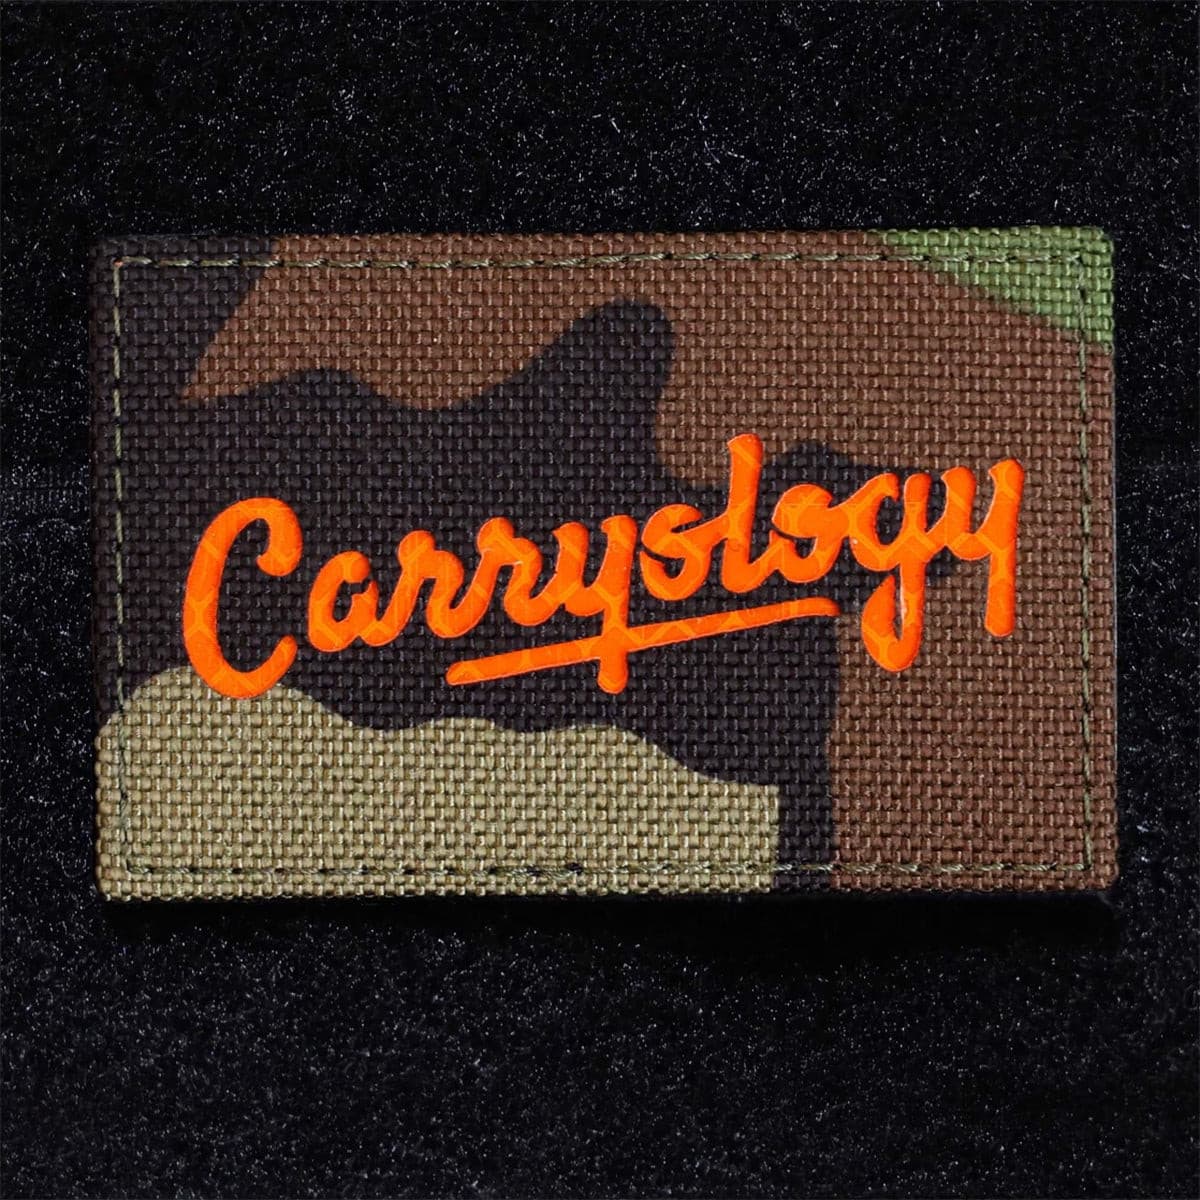 Carryology Morale Patch - P05 Firefly M81 US Woodland Carryology Patch Suburban.